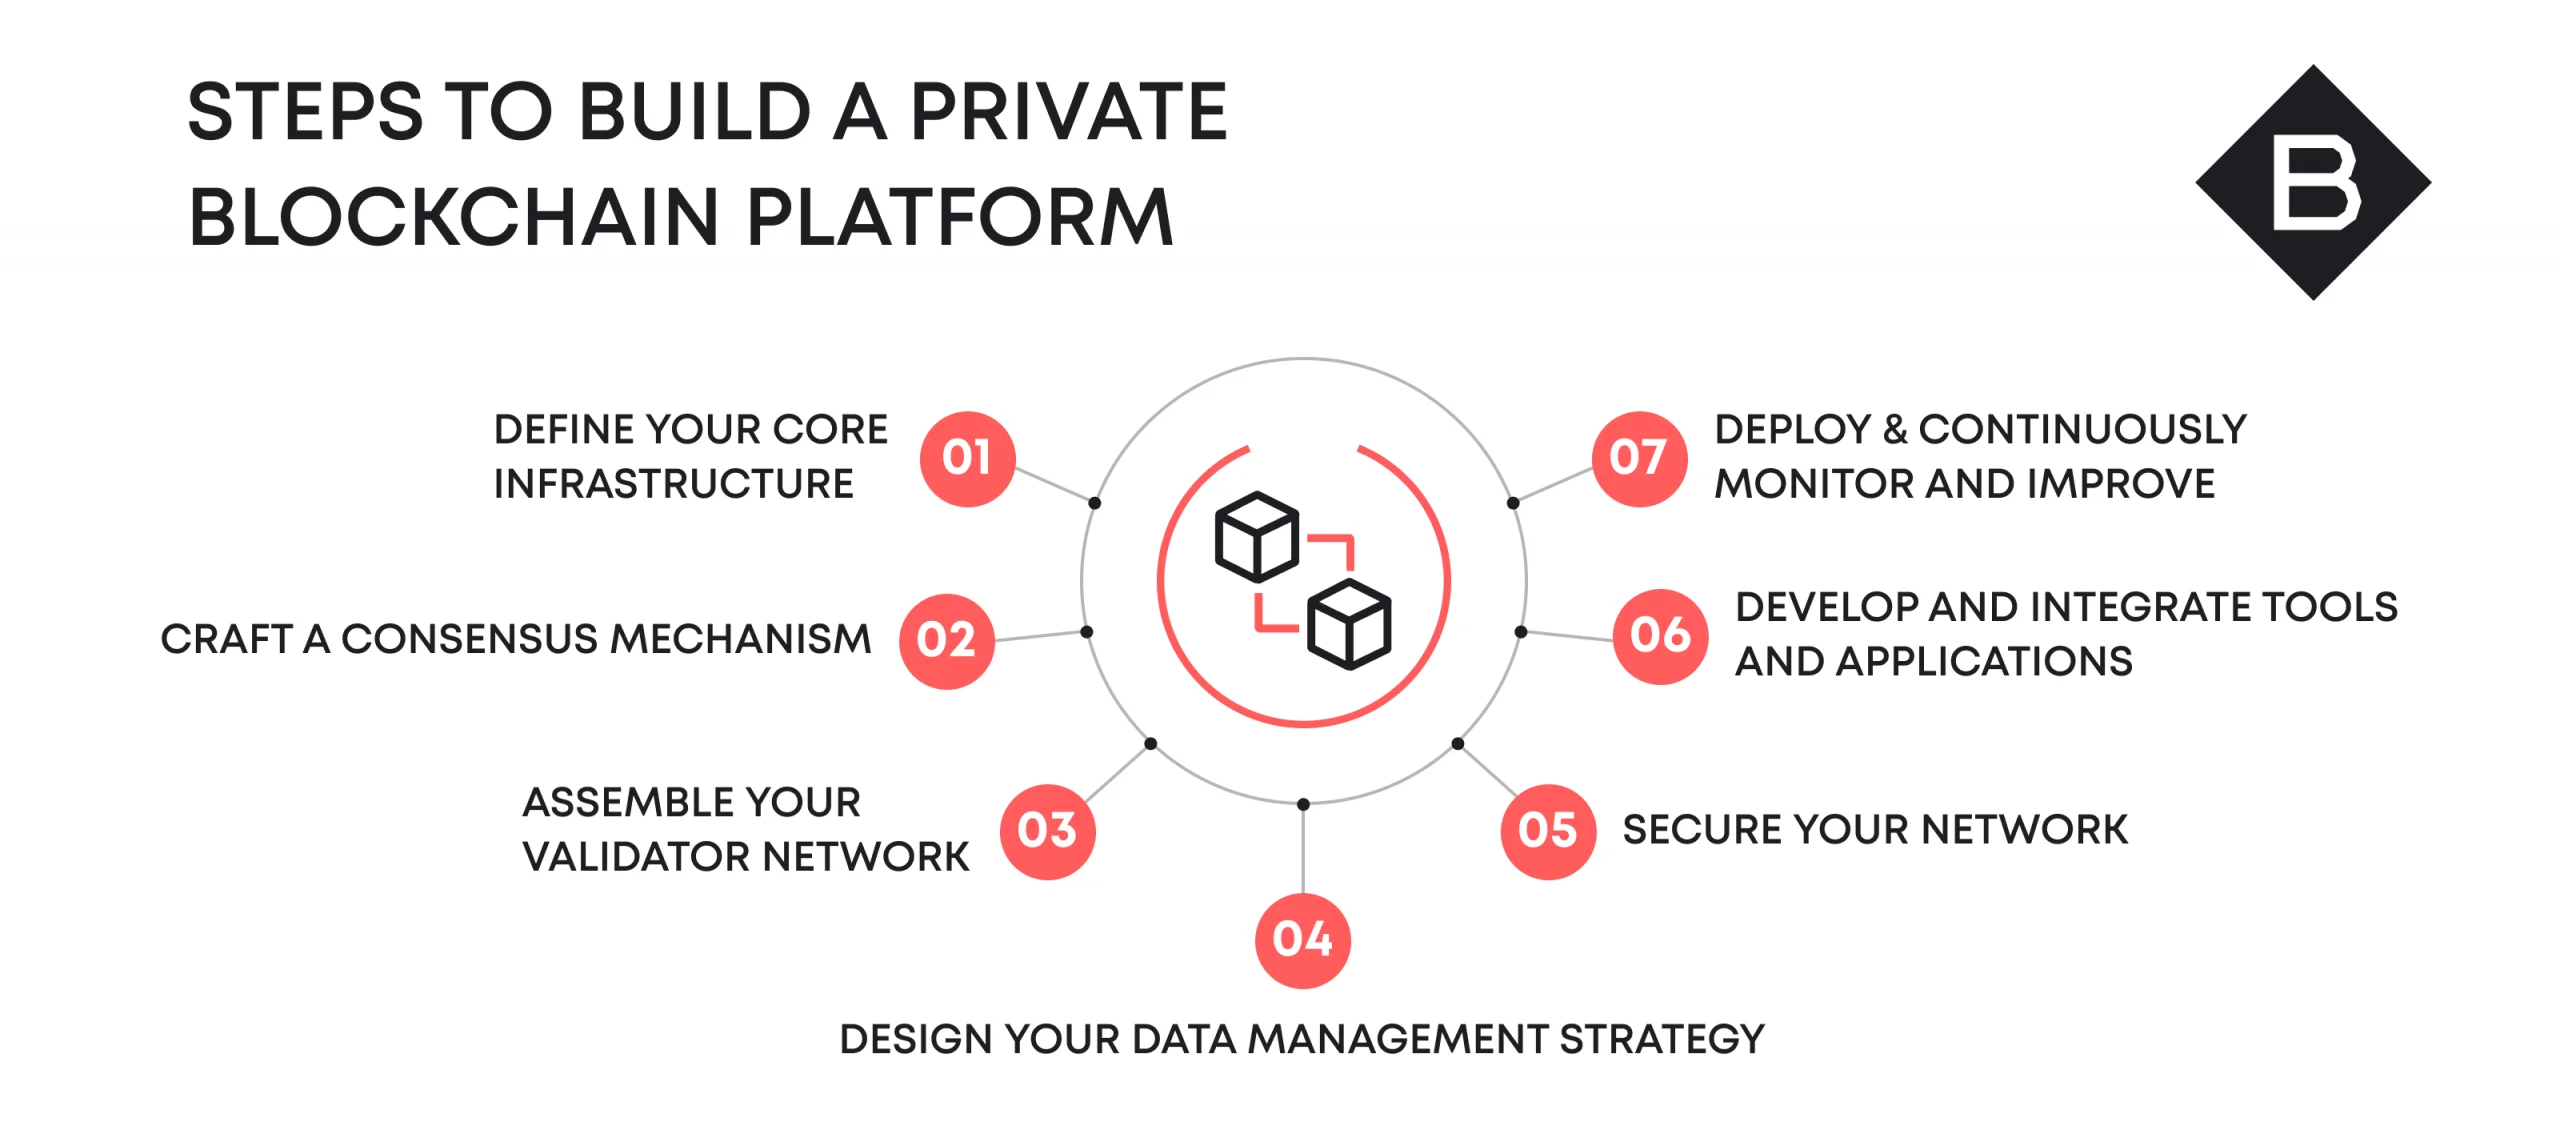 Private blockchains offer a transformative advantage for businesses, but their intricate nature demands meticulous planning and a long-term vision.